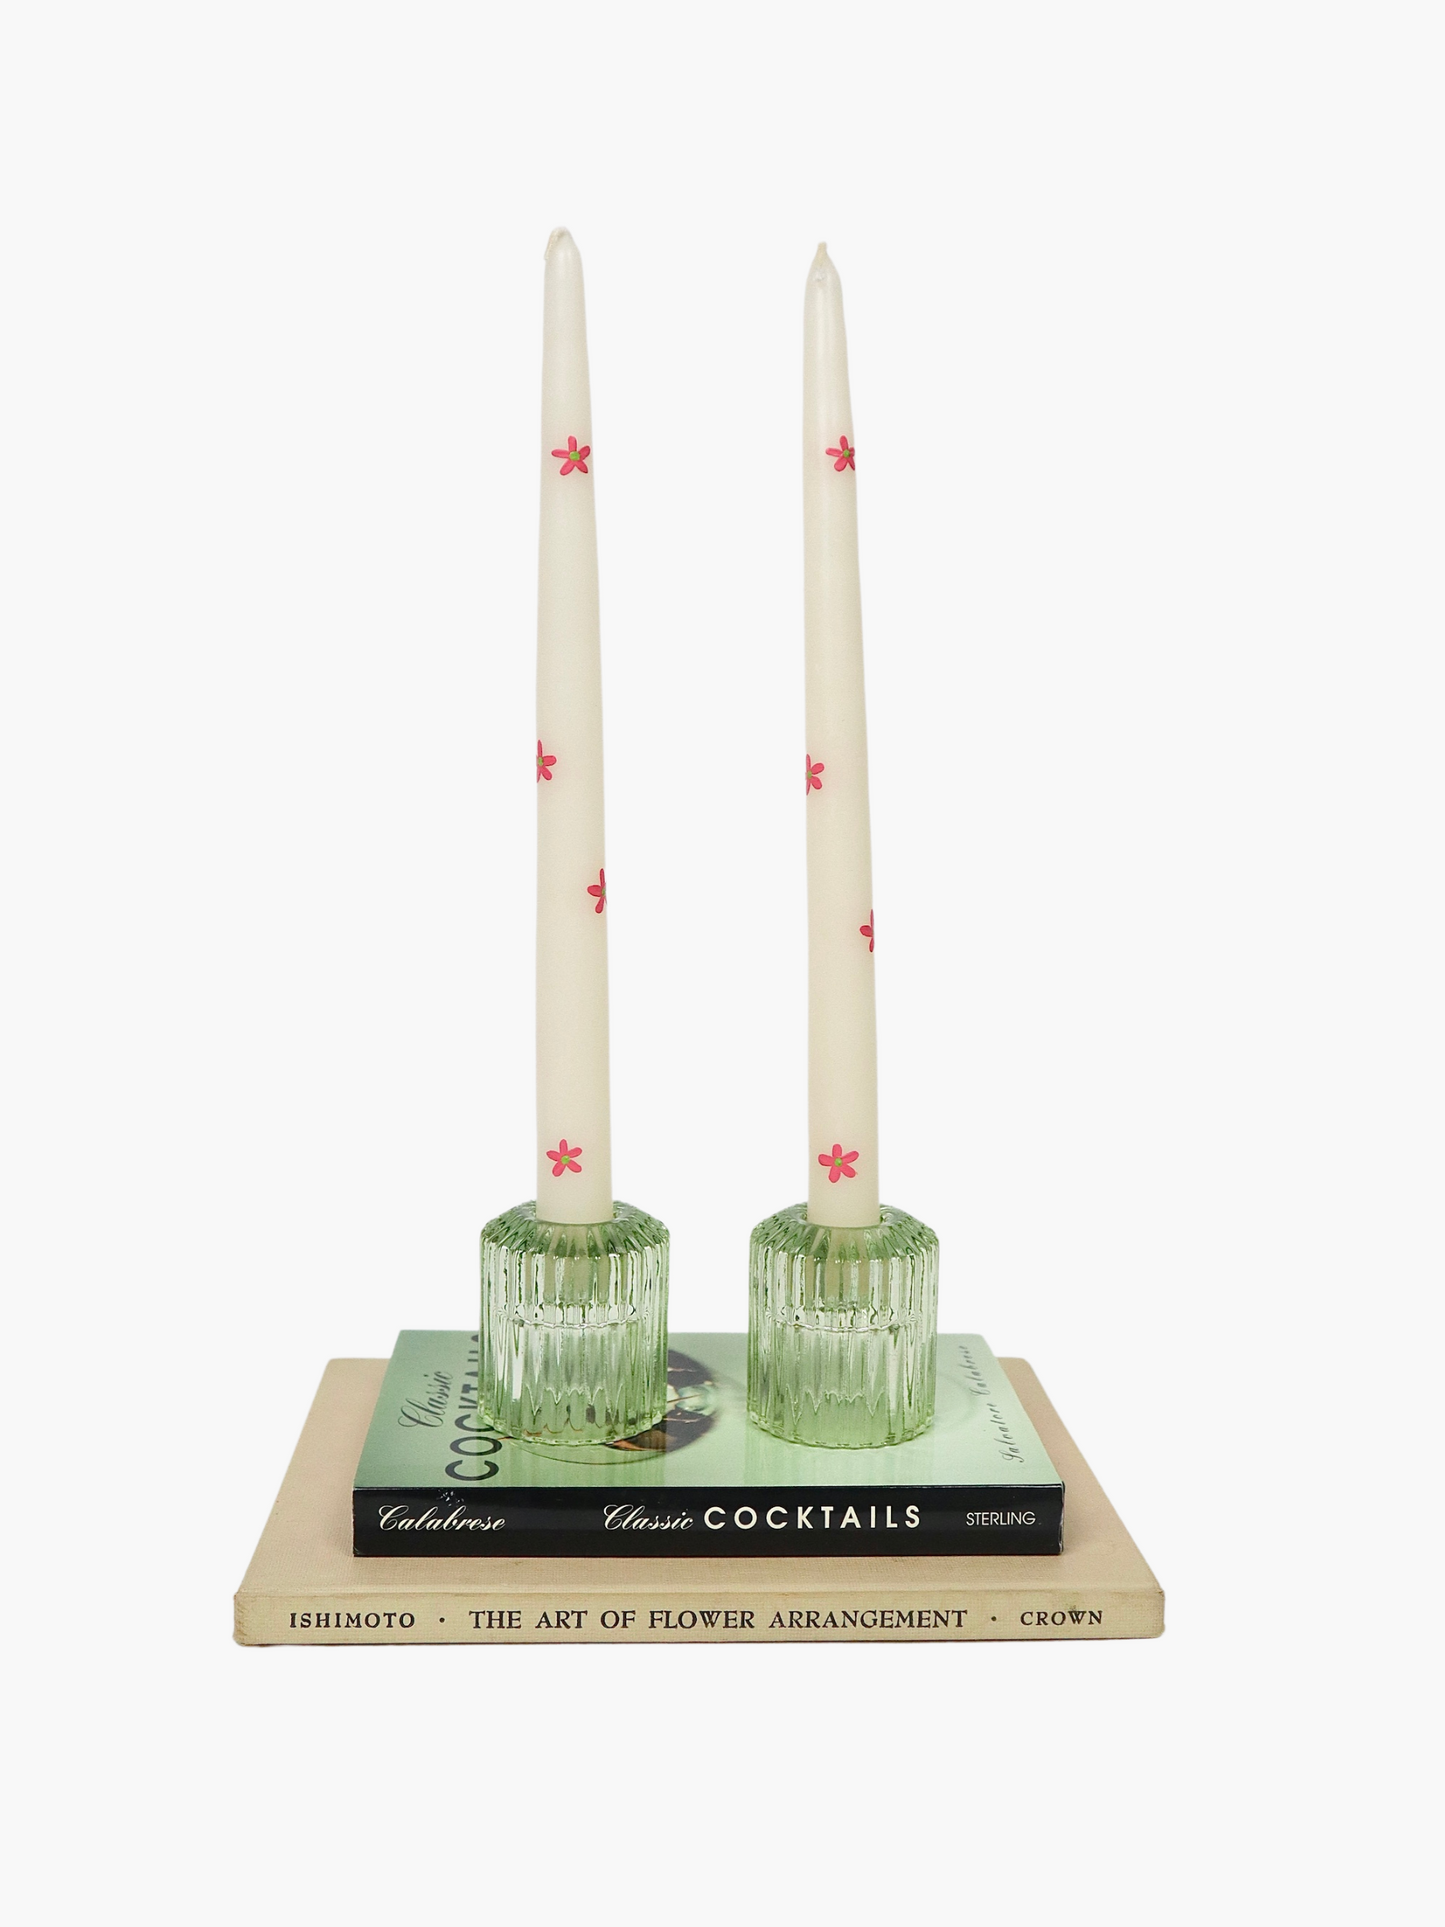 Dual Candle Holder